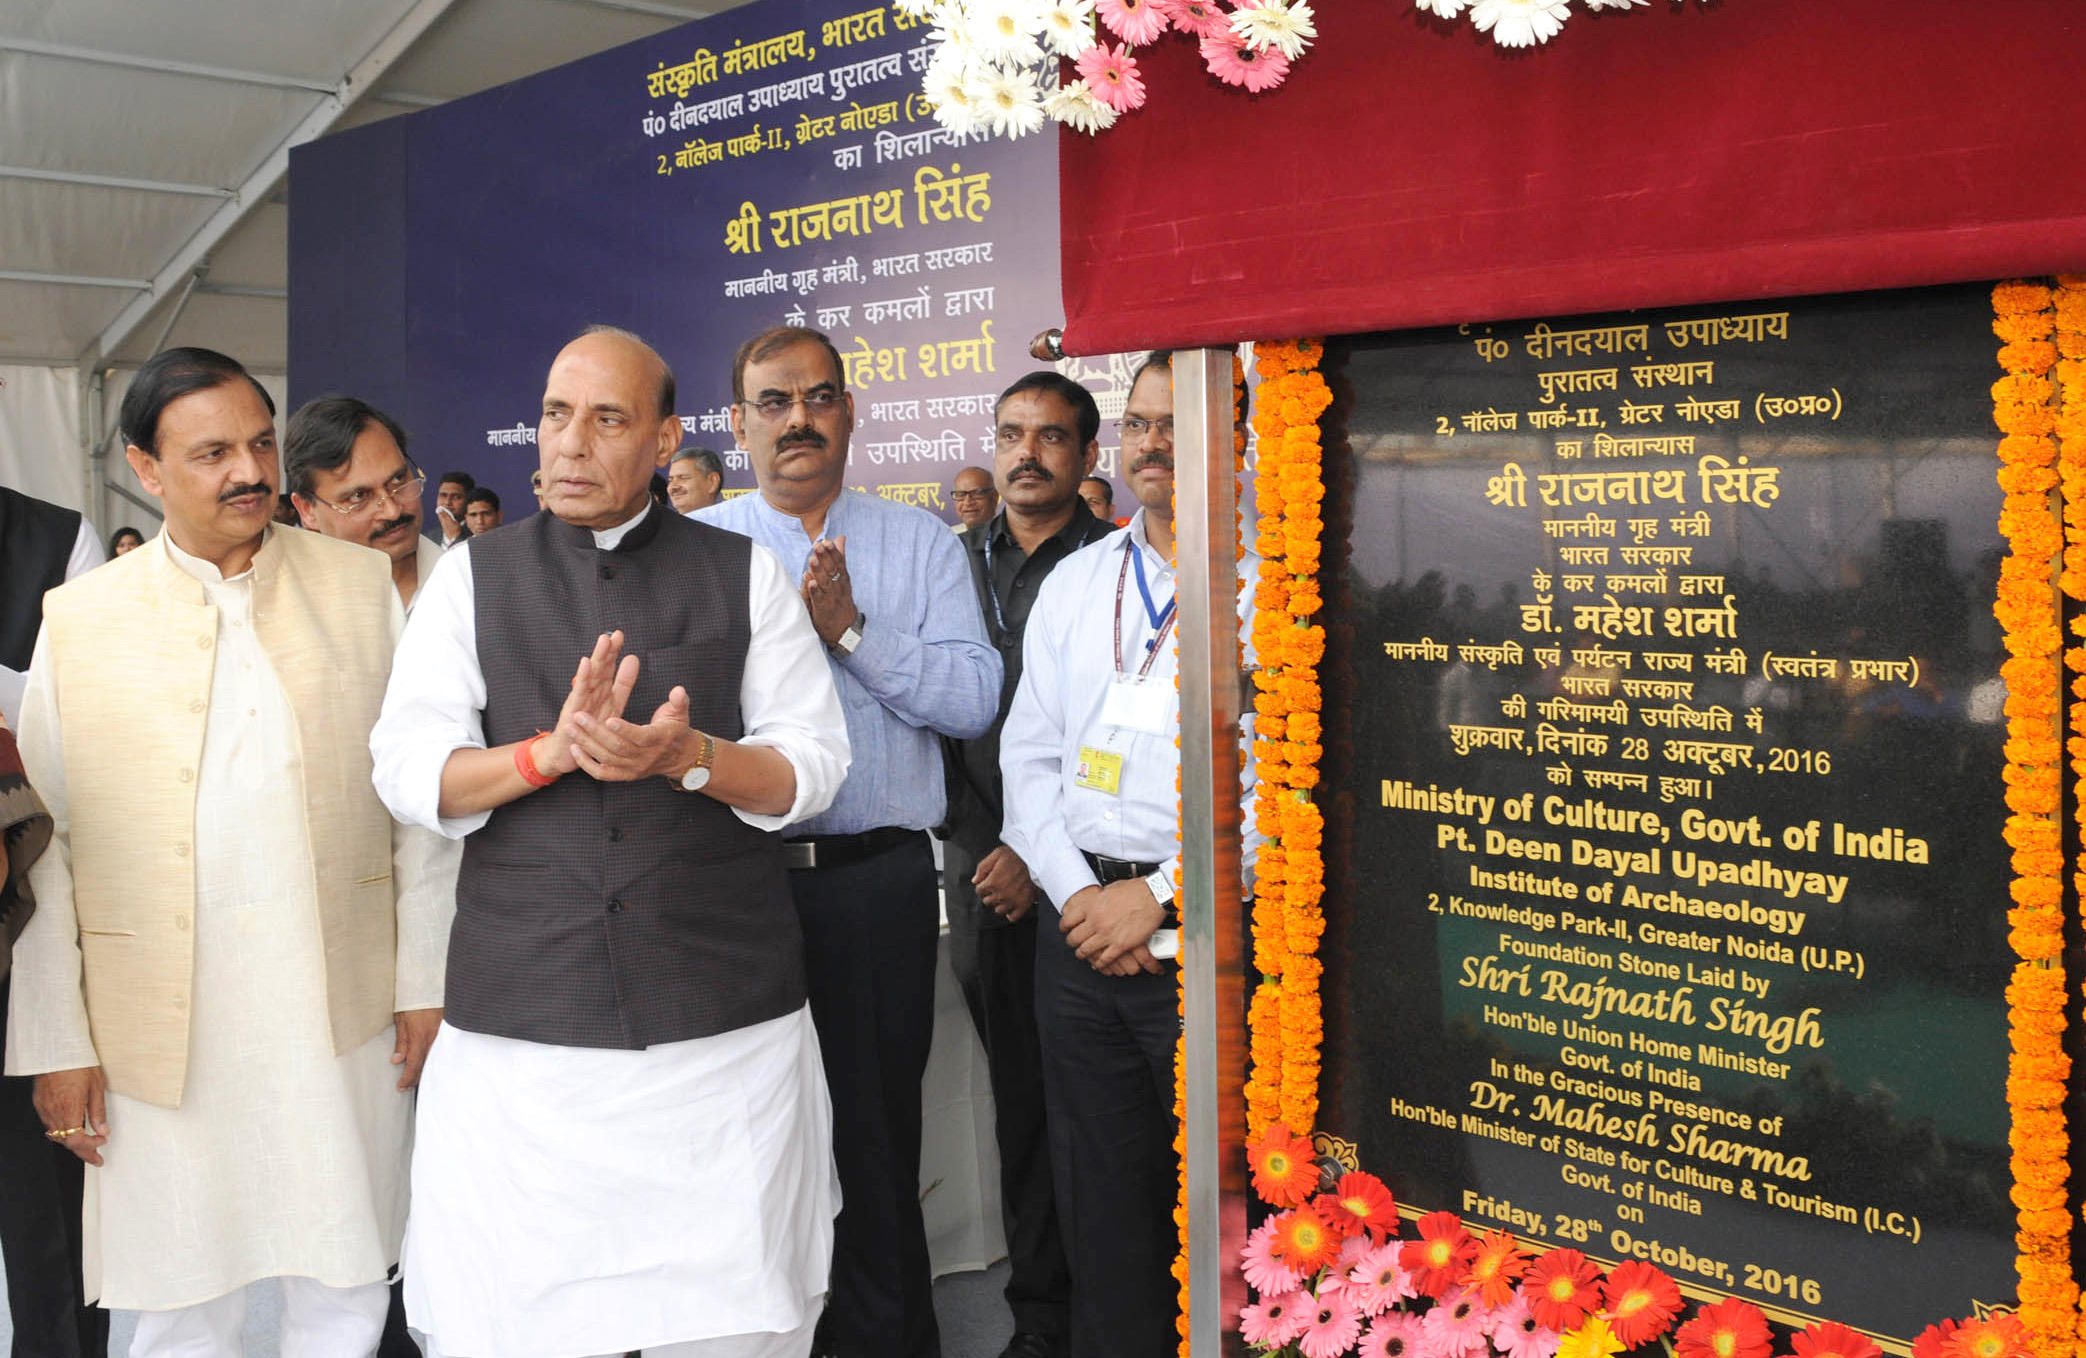 The Union Home Minister, Shri Rajnath Singh laying the foundation stone of Pt. Deen Dayal Upadhyay Institute of Archaeology, Archaeology Survey of India, in Greater Noida, Uttar Pradesh on October 28, 2016. The Minister of State for Culture and Tourism (Independent Charge), Dr. Mahesh Sharma and the Secretary, Ministry of Culture, Shri N.K. Sinha are also seen.